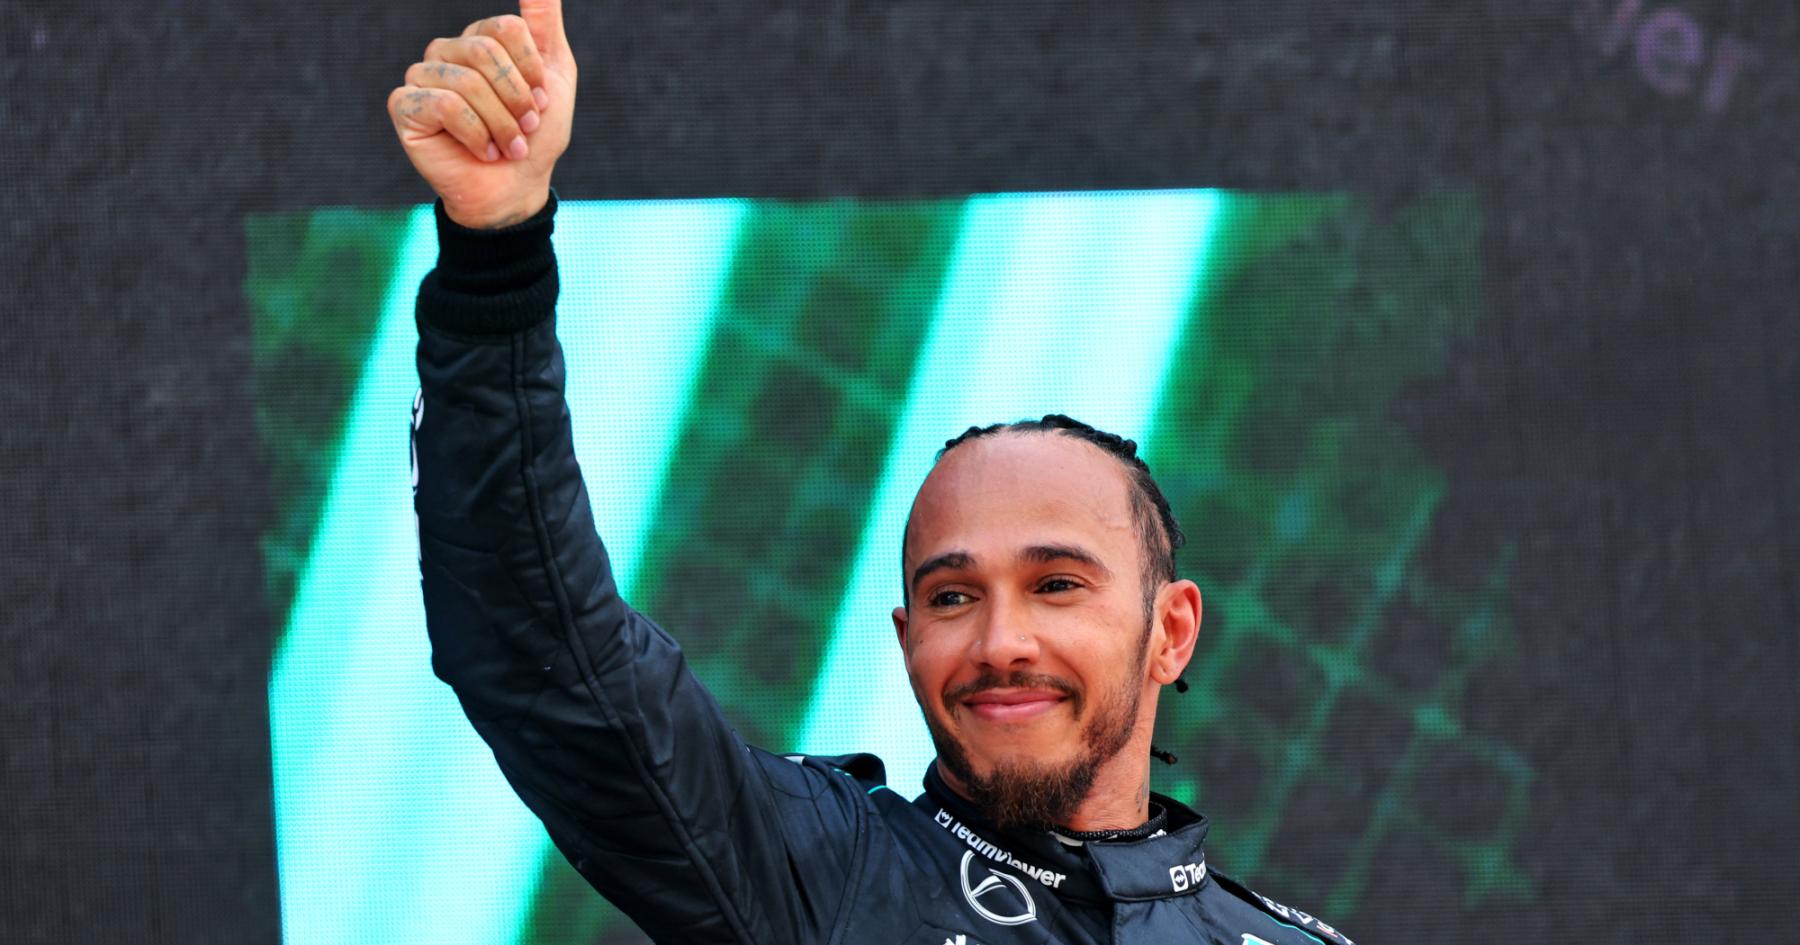 Hamilton Inspires Mercedes Team with Rally Cry after 'Pinch of Salt' Result